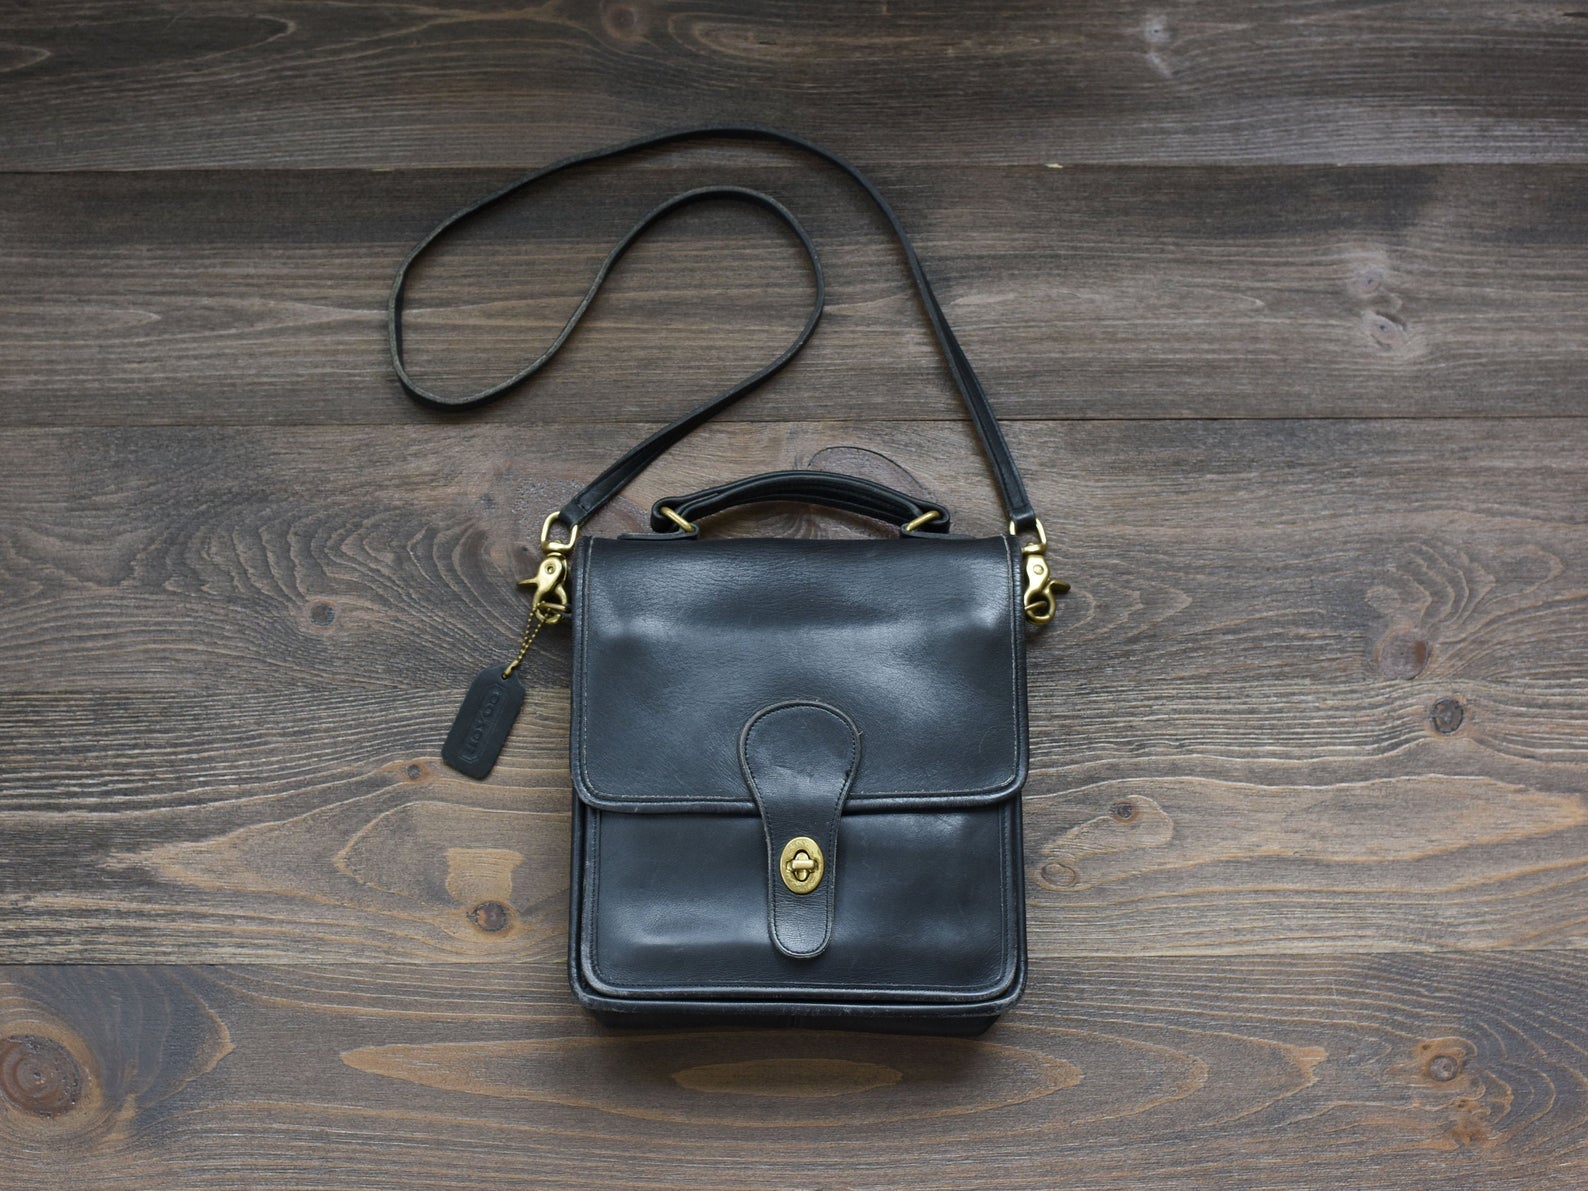 Coach Rehab project blog: Guide to dates of vintage Coach bags